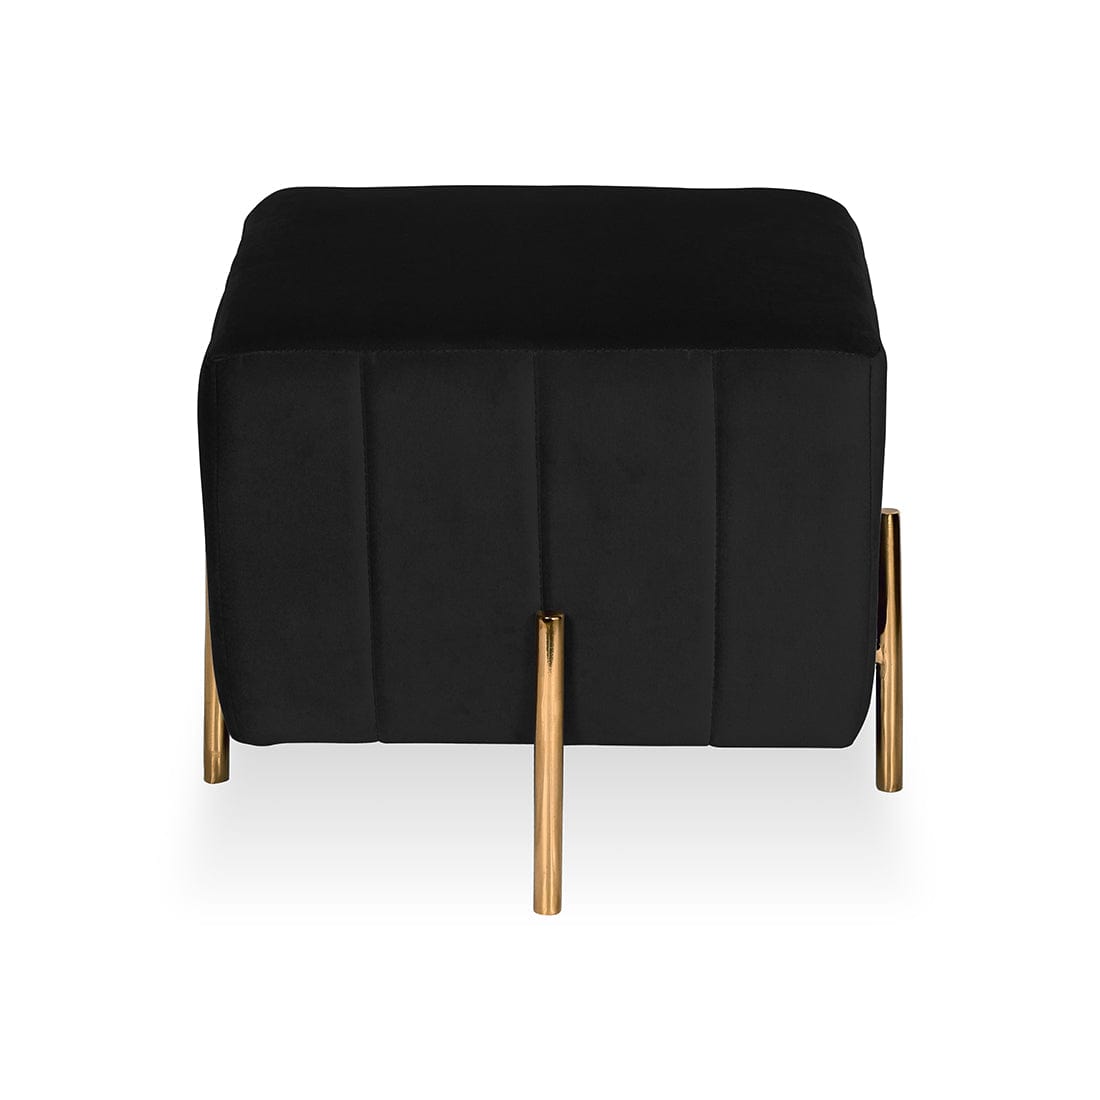 DOE BUCK SQUARE GOLD OTTOMAN STAINLESS STEEL IN BLACK